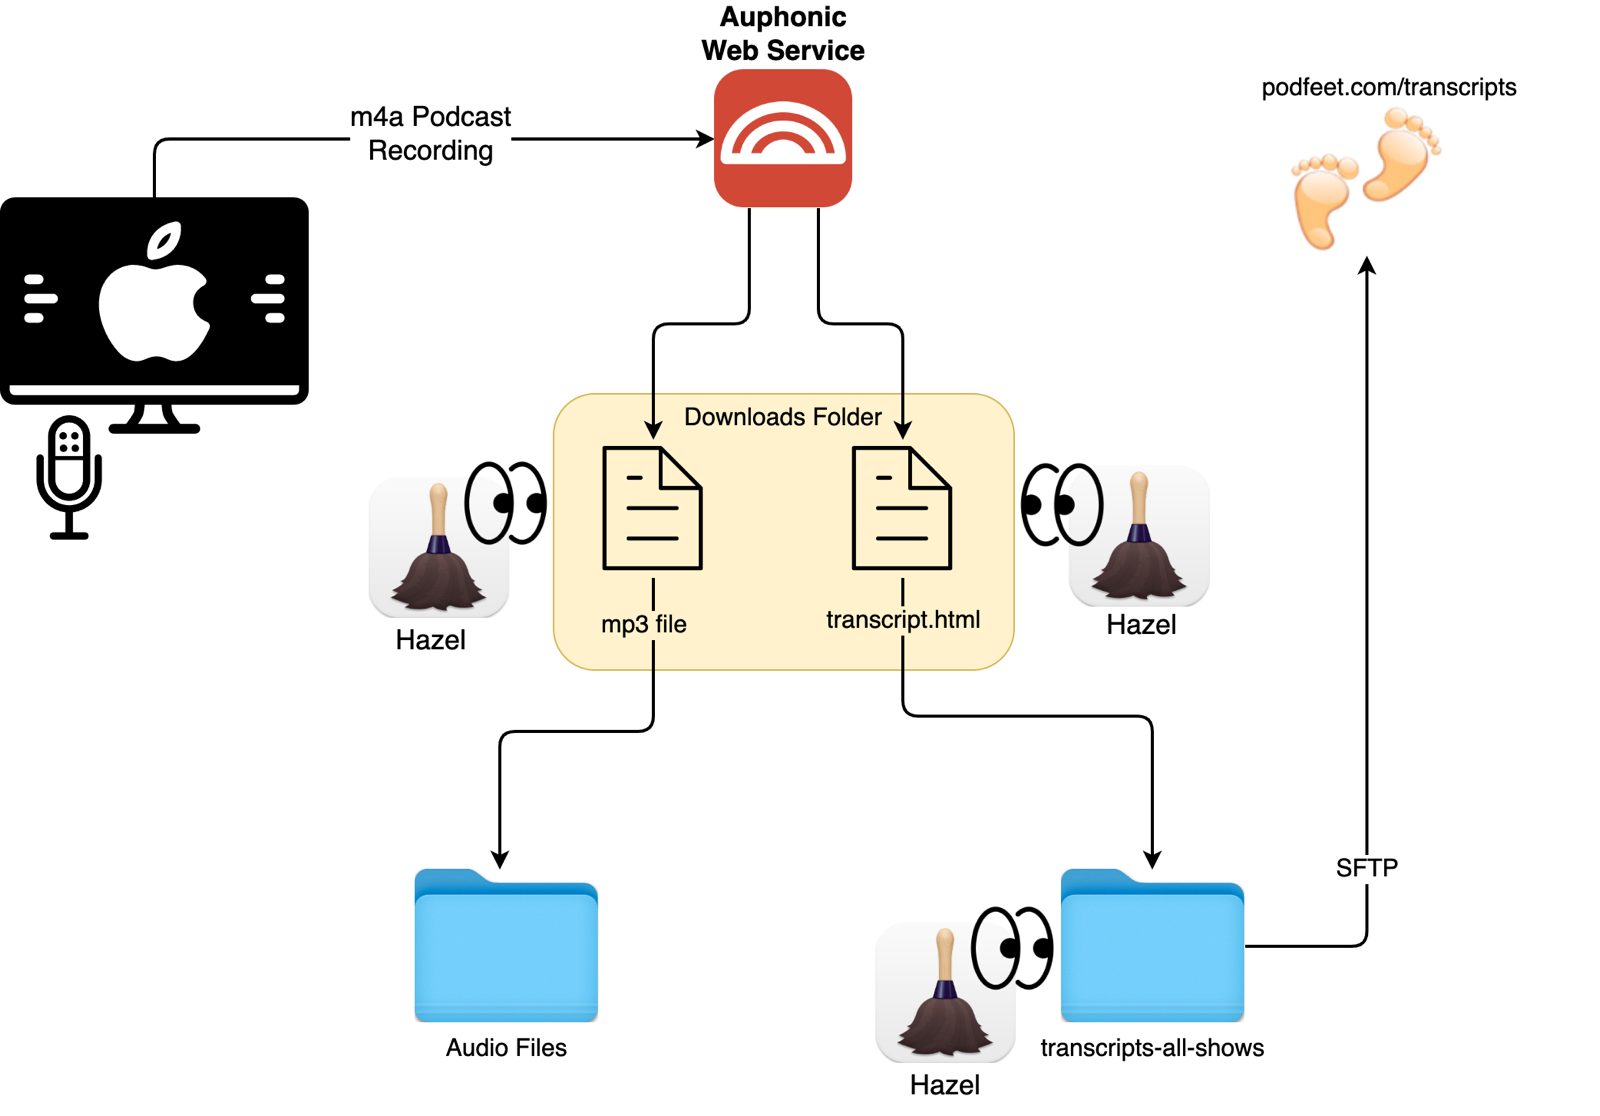 Diagram showing audio files going to Auphonic, downloading to a folder, and then Hazel dispatching them including pushing the transcript up to podfeet.com